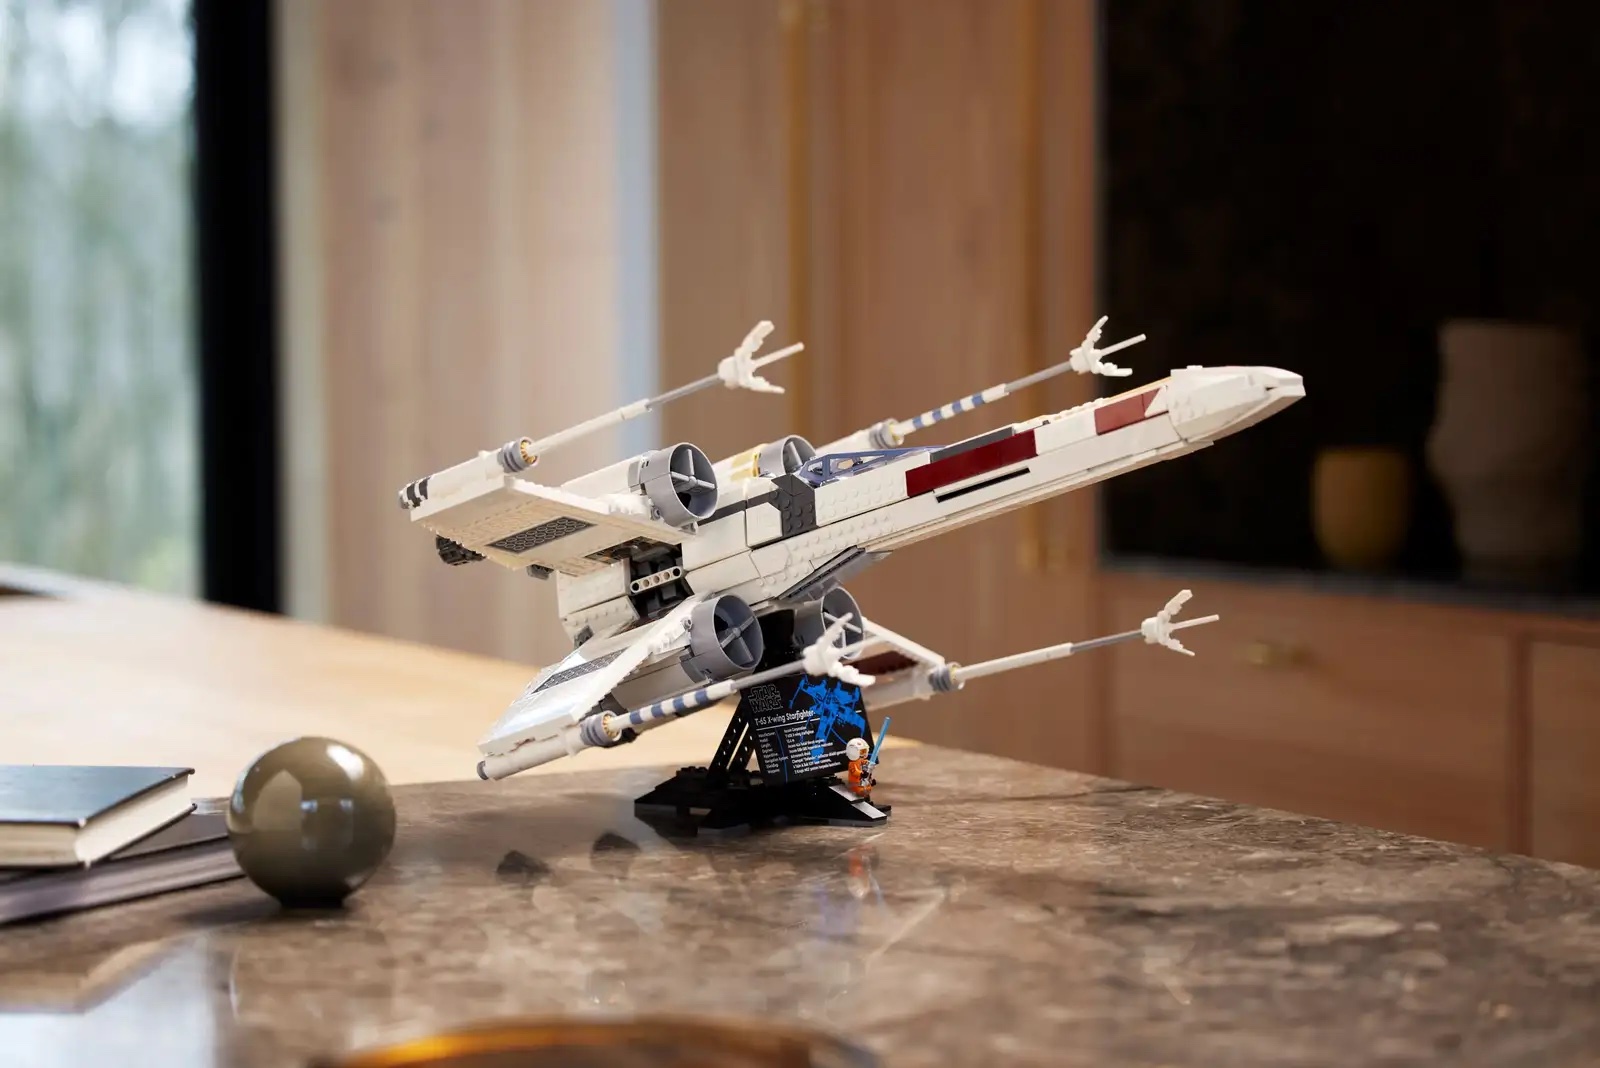 A LEGO X-Wing Starfighter on a kitchen bench